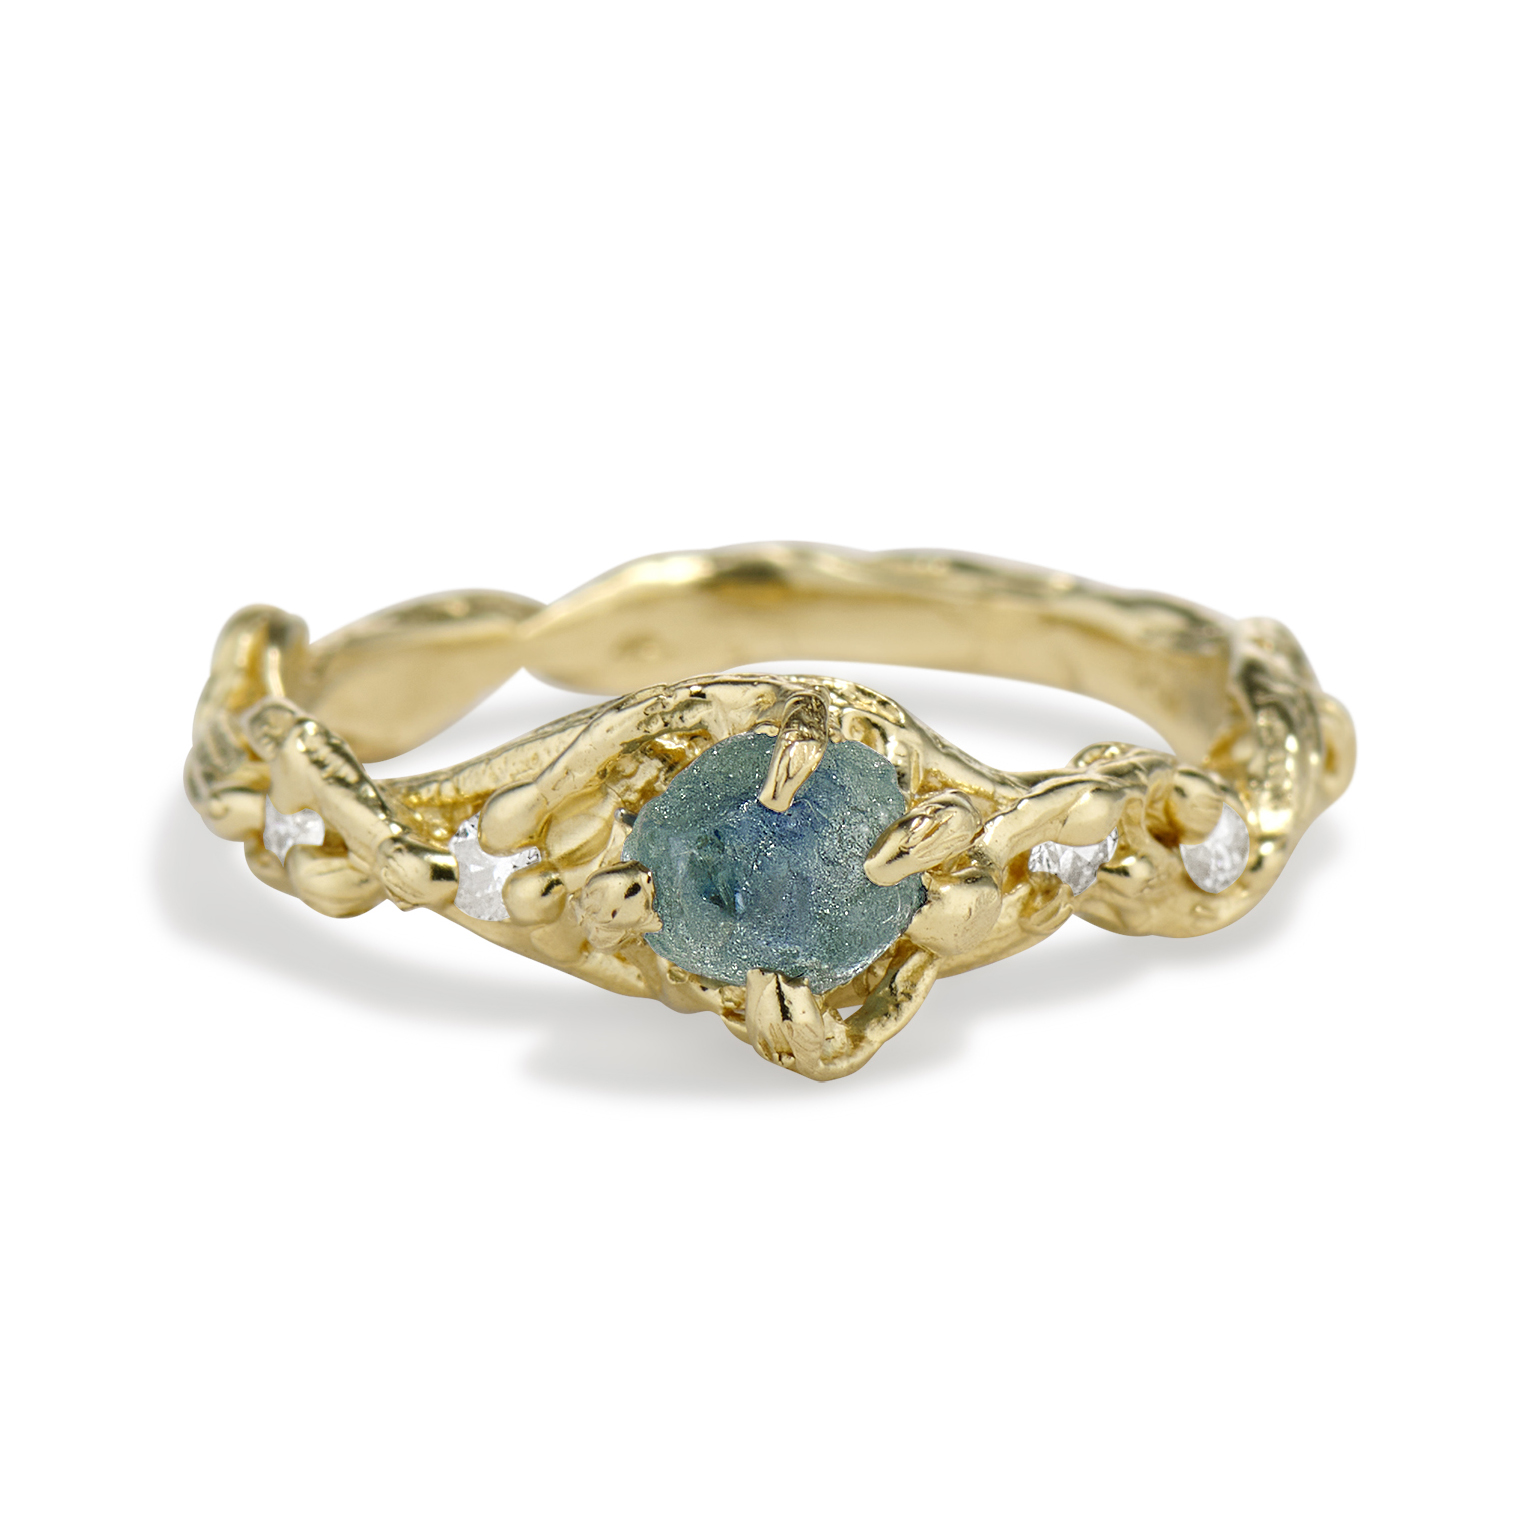 Woodland Montana Sapphire Ring, shown in 14K yellow gold